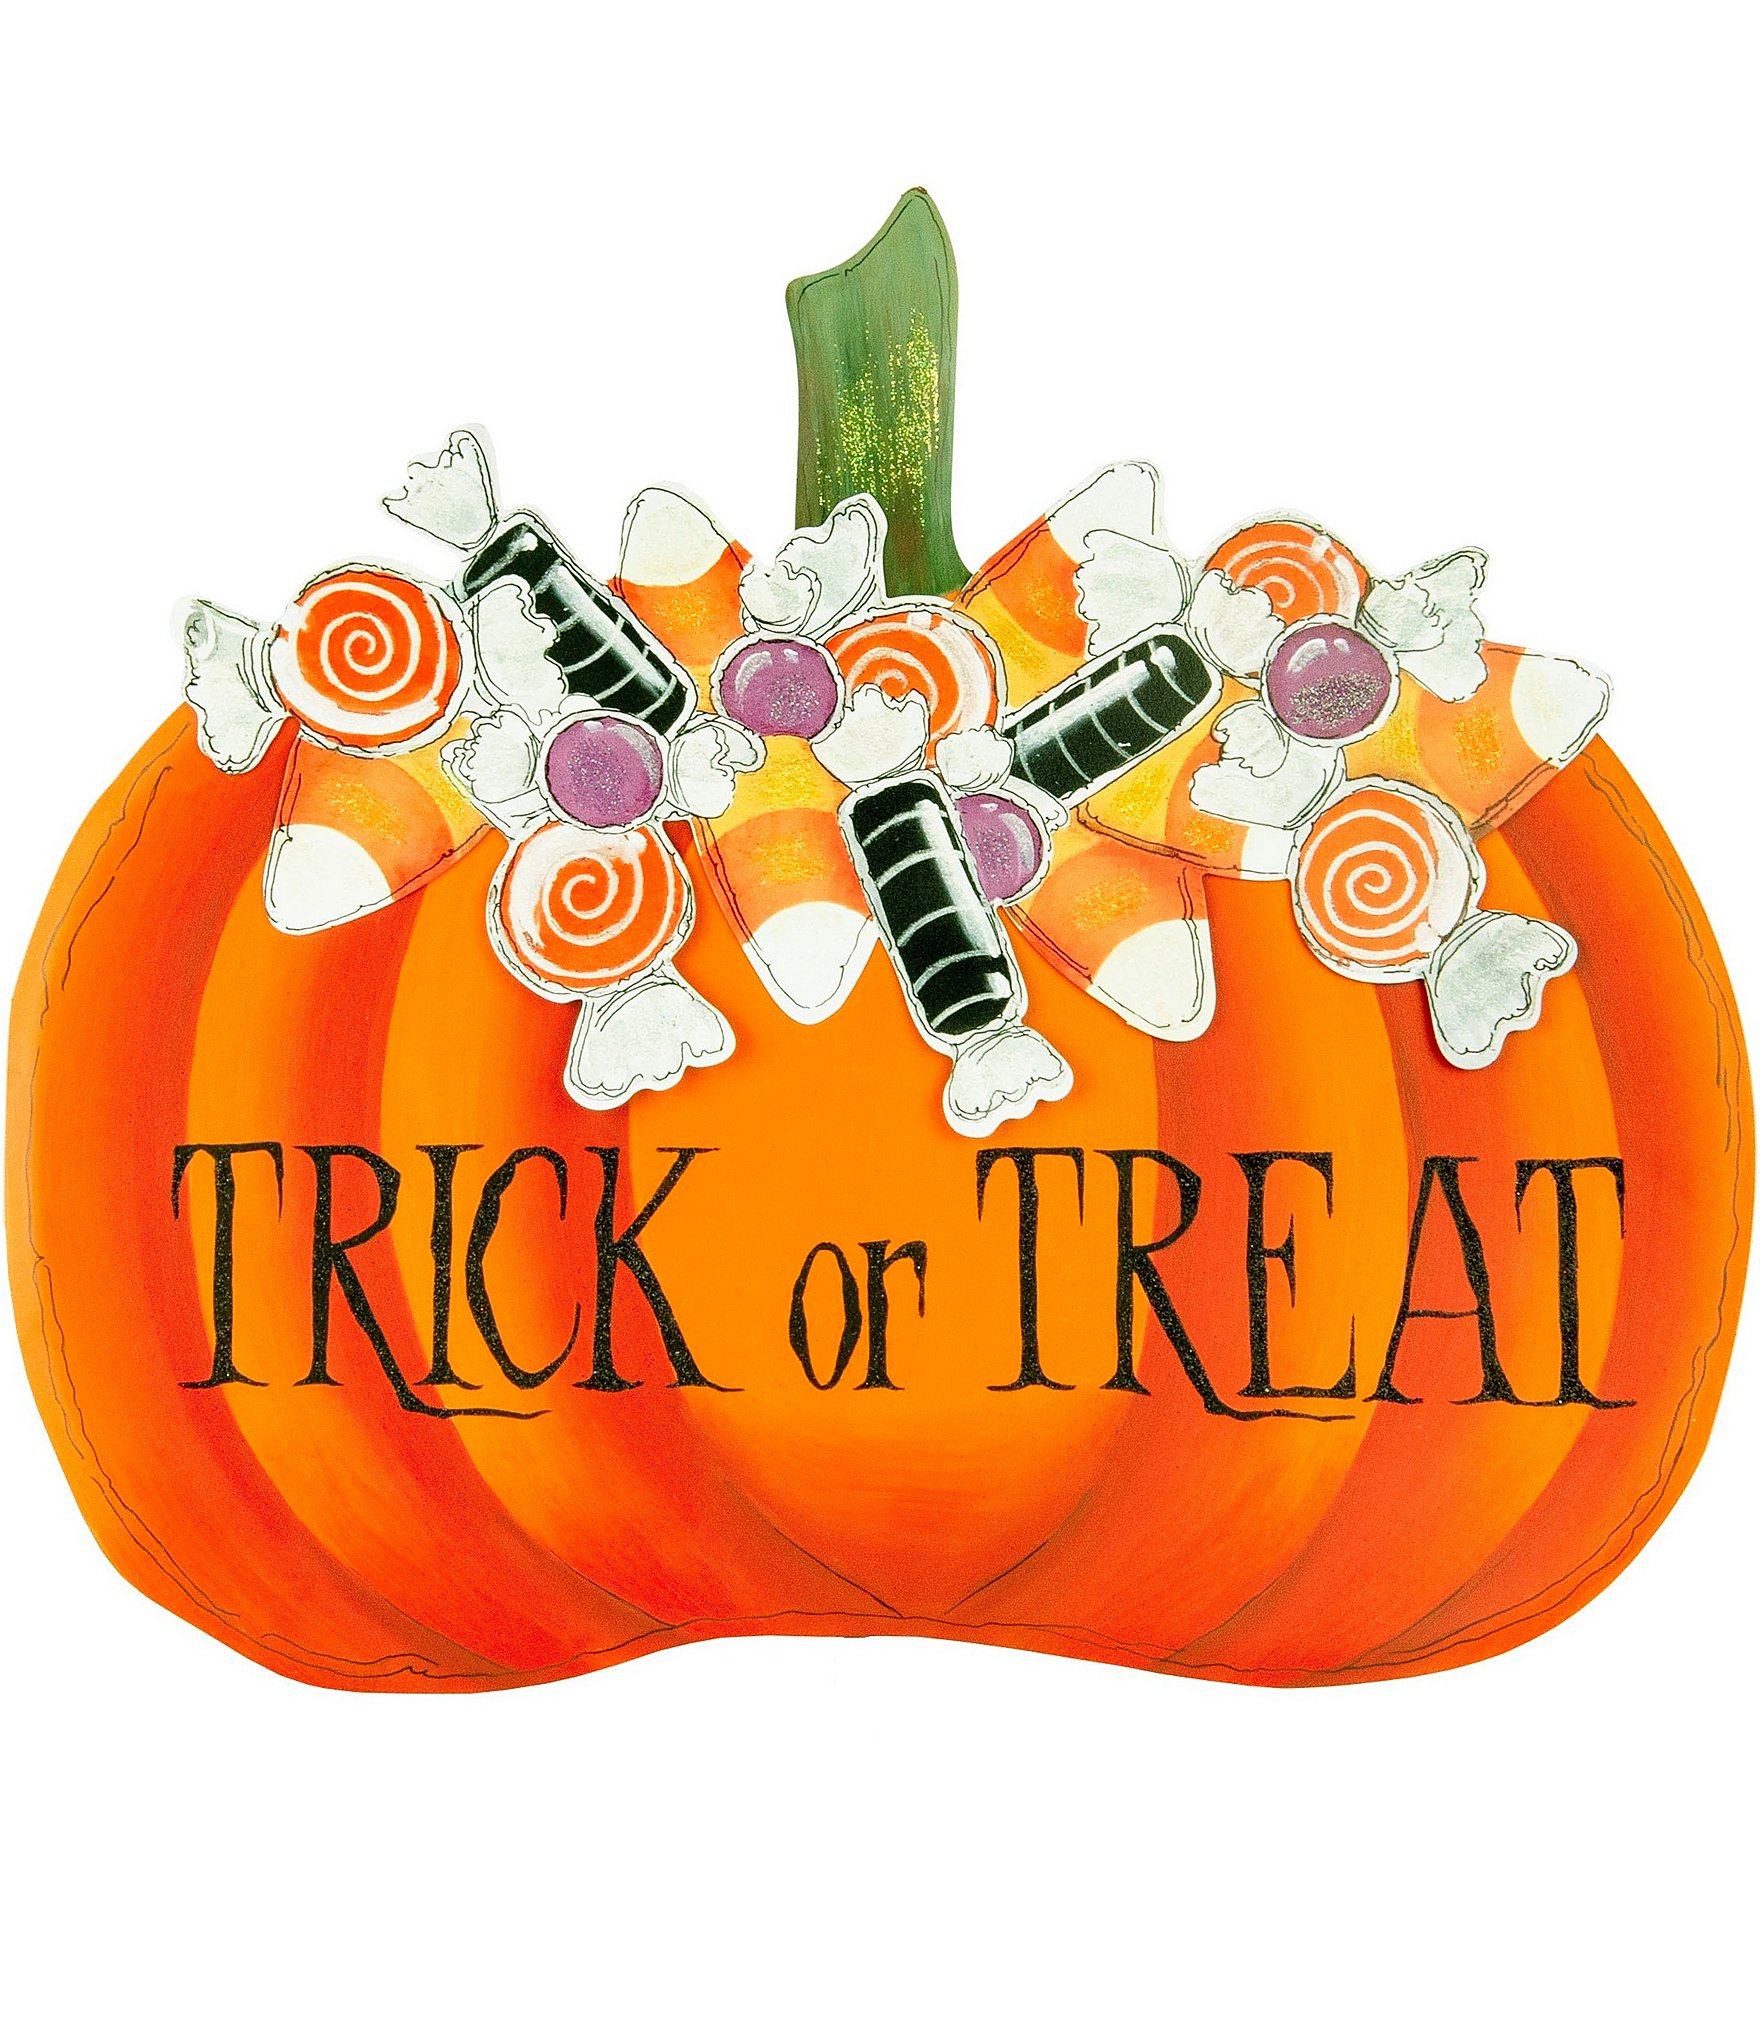 Trick Treat Candy Pumpkin Metal, The Round Top Collection Metal Art